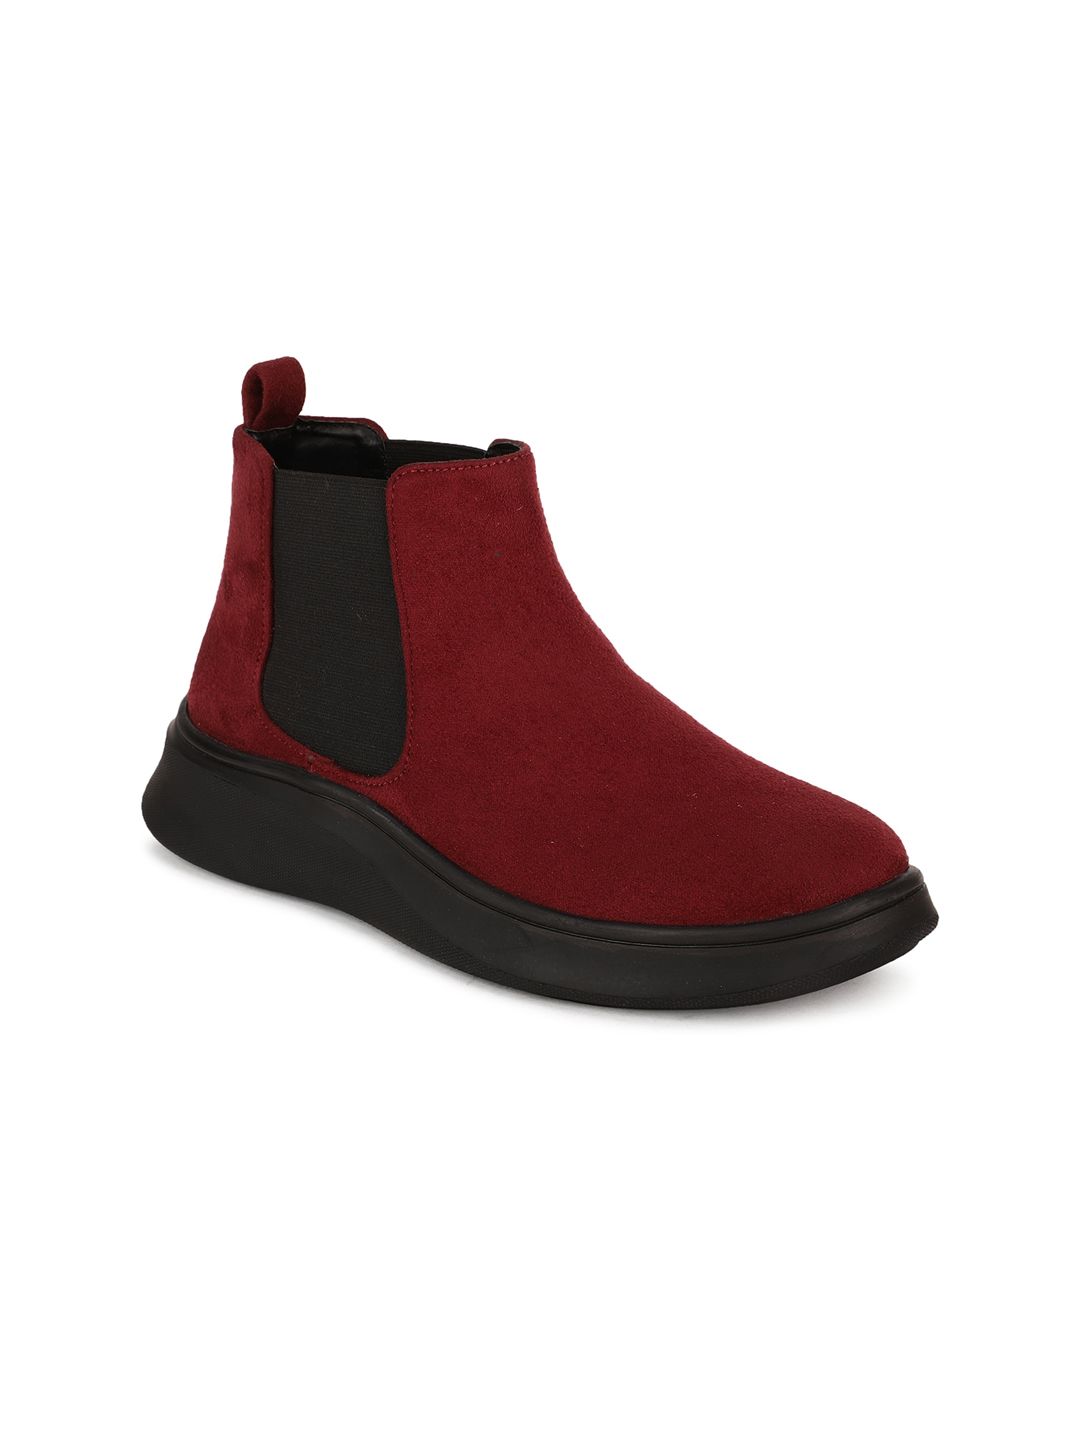 Bruno Manetti Maroon & Black Suede High-Top Flatform Heeled Boots Price in India